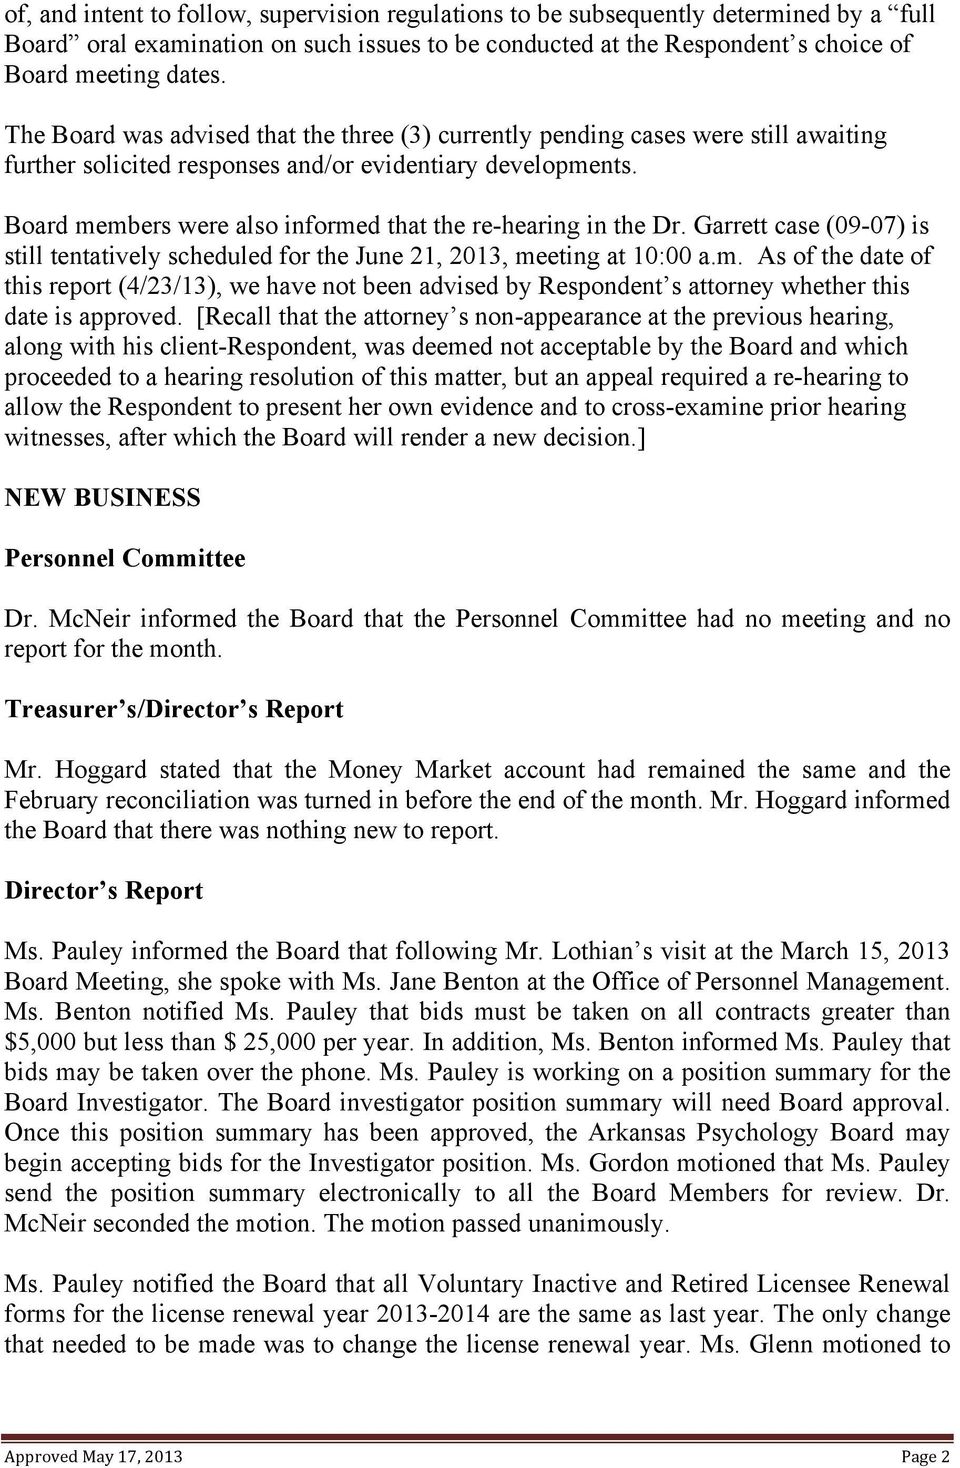 Board members were also informed that the re-hearing in the Dr. Garrett case (09-07) is still tentatively scheduled for the June 21, 2013, meeting at 10:00 a.m. As of the date of this report (4/23/13), we have not been advised by Respondent s attorney whether this date is approved.